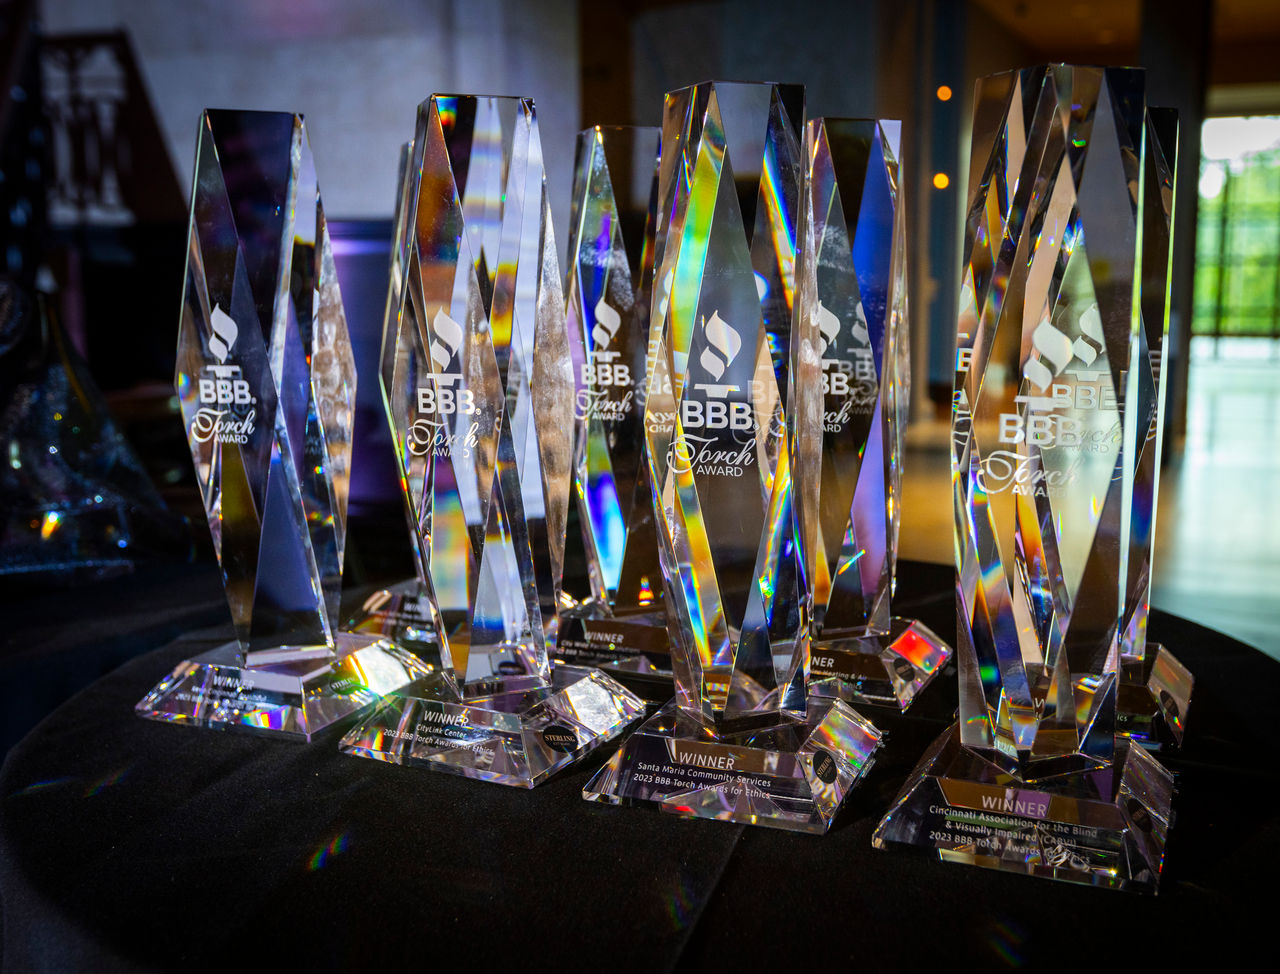 The Torch Awards for Ethics winner trophies.